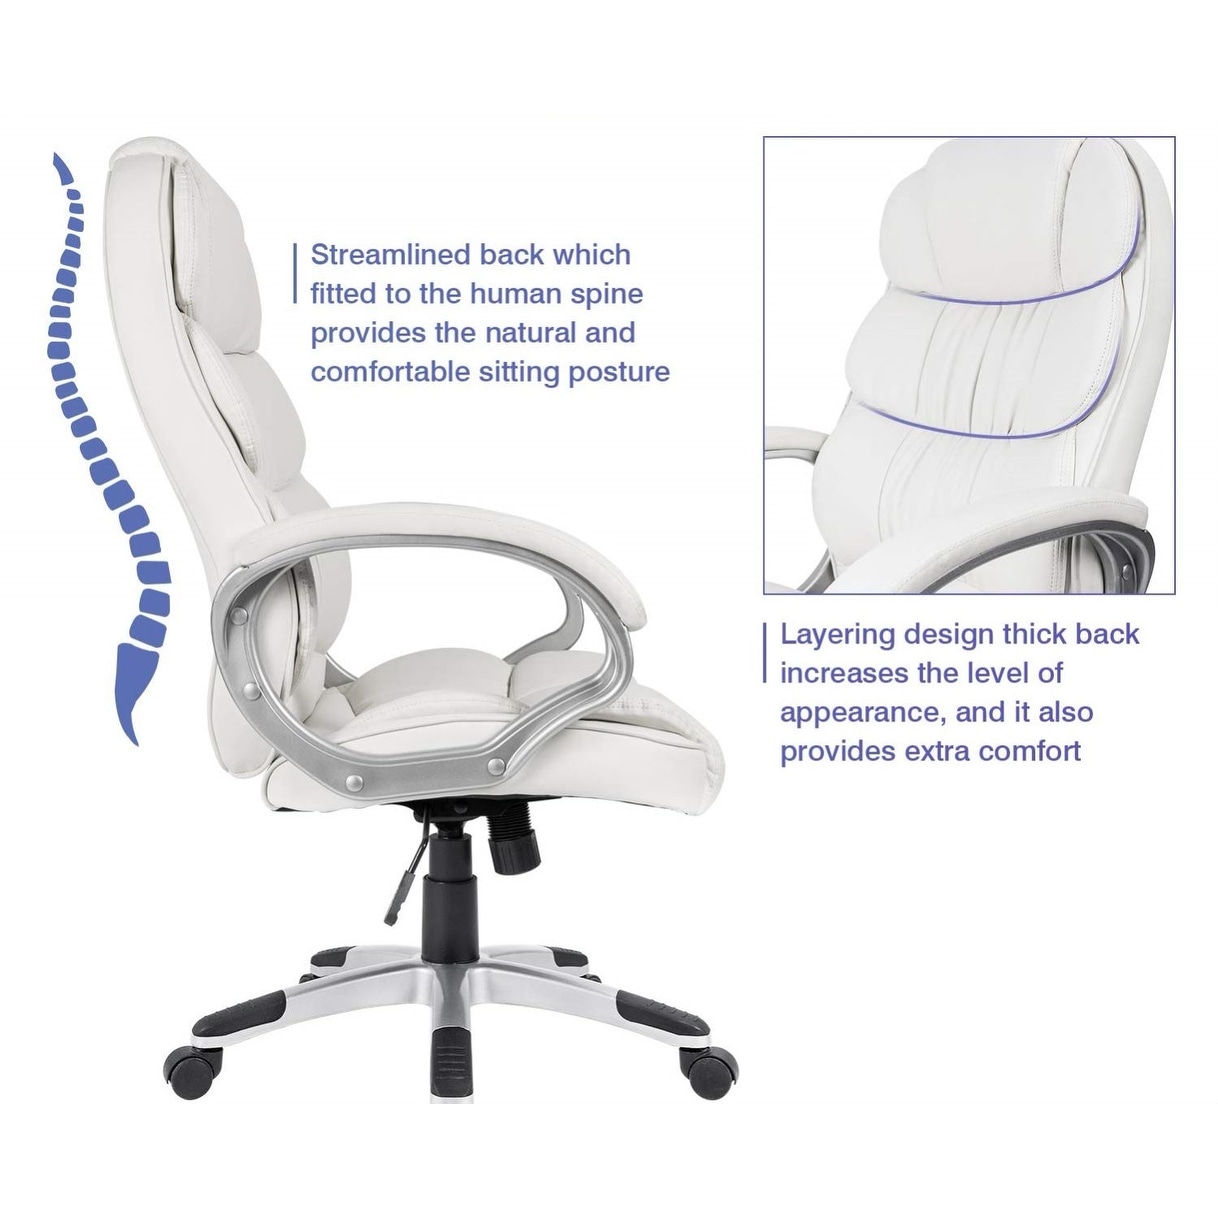 https://ak1.ostkcdn.com/images/products/is/images/direct/b7bdb8a3a0fd342617914d6ec2d70b8b20aebe6a/Homall-Office-Chair-High-Back-Computer-Ergonomic-Desk-Chair-PU-Leather-Adjustable-Height-Modern-Executive-Swivel-Task-Chair.jpg